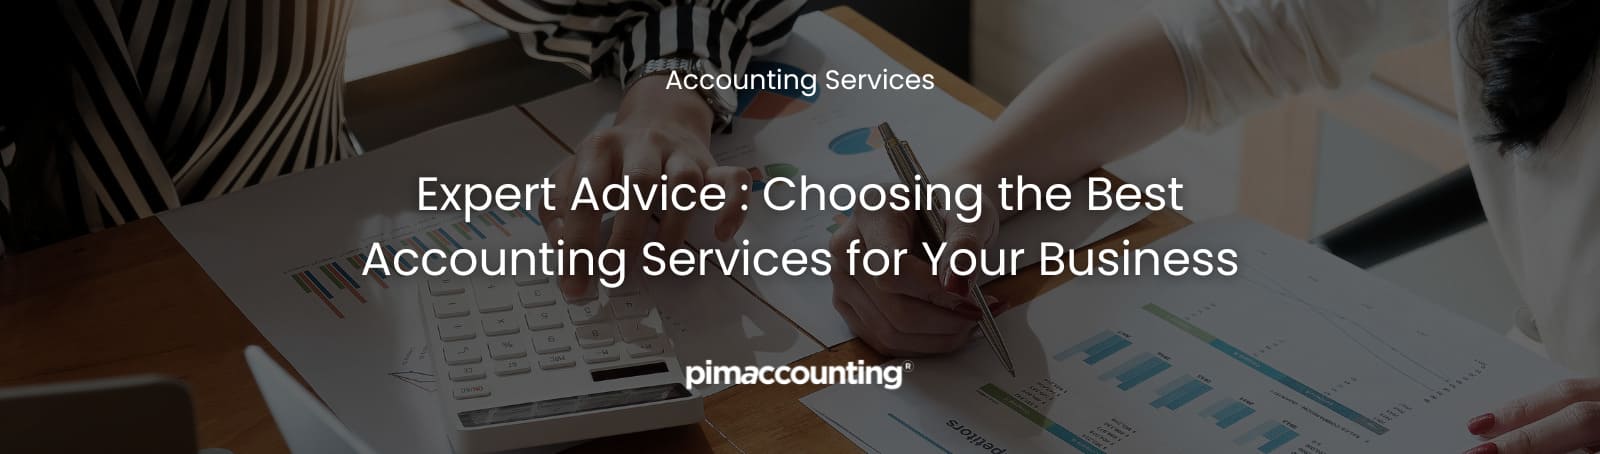 Choosing the Best Accounting Services for Your Business